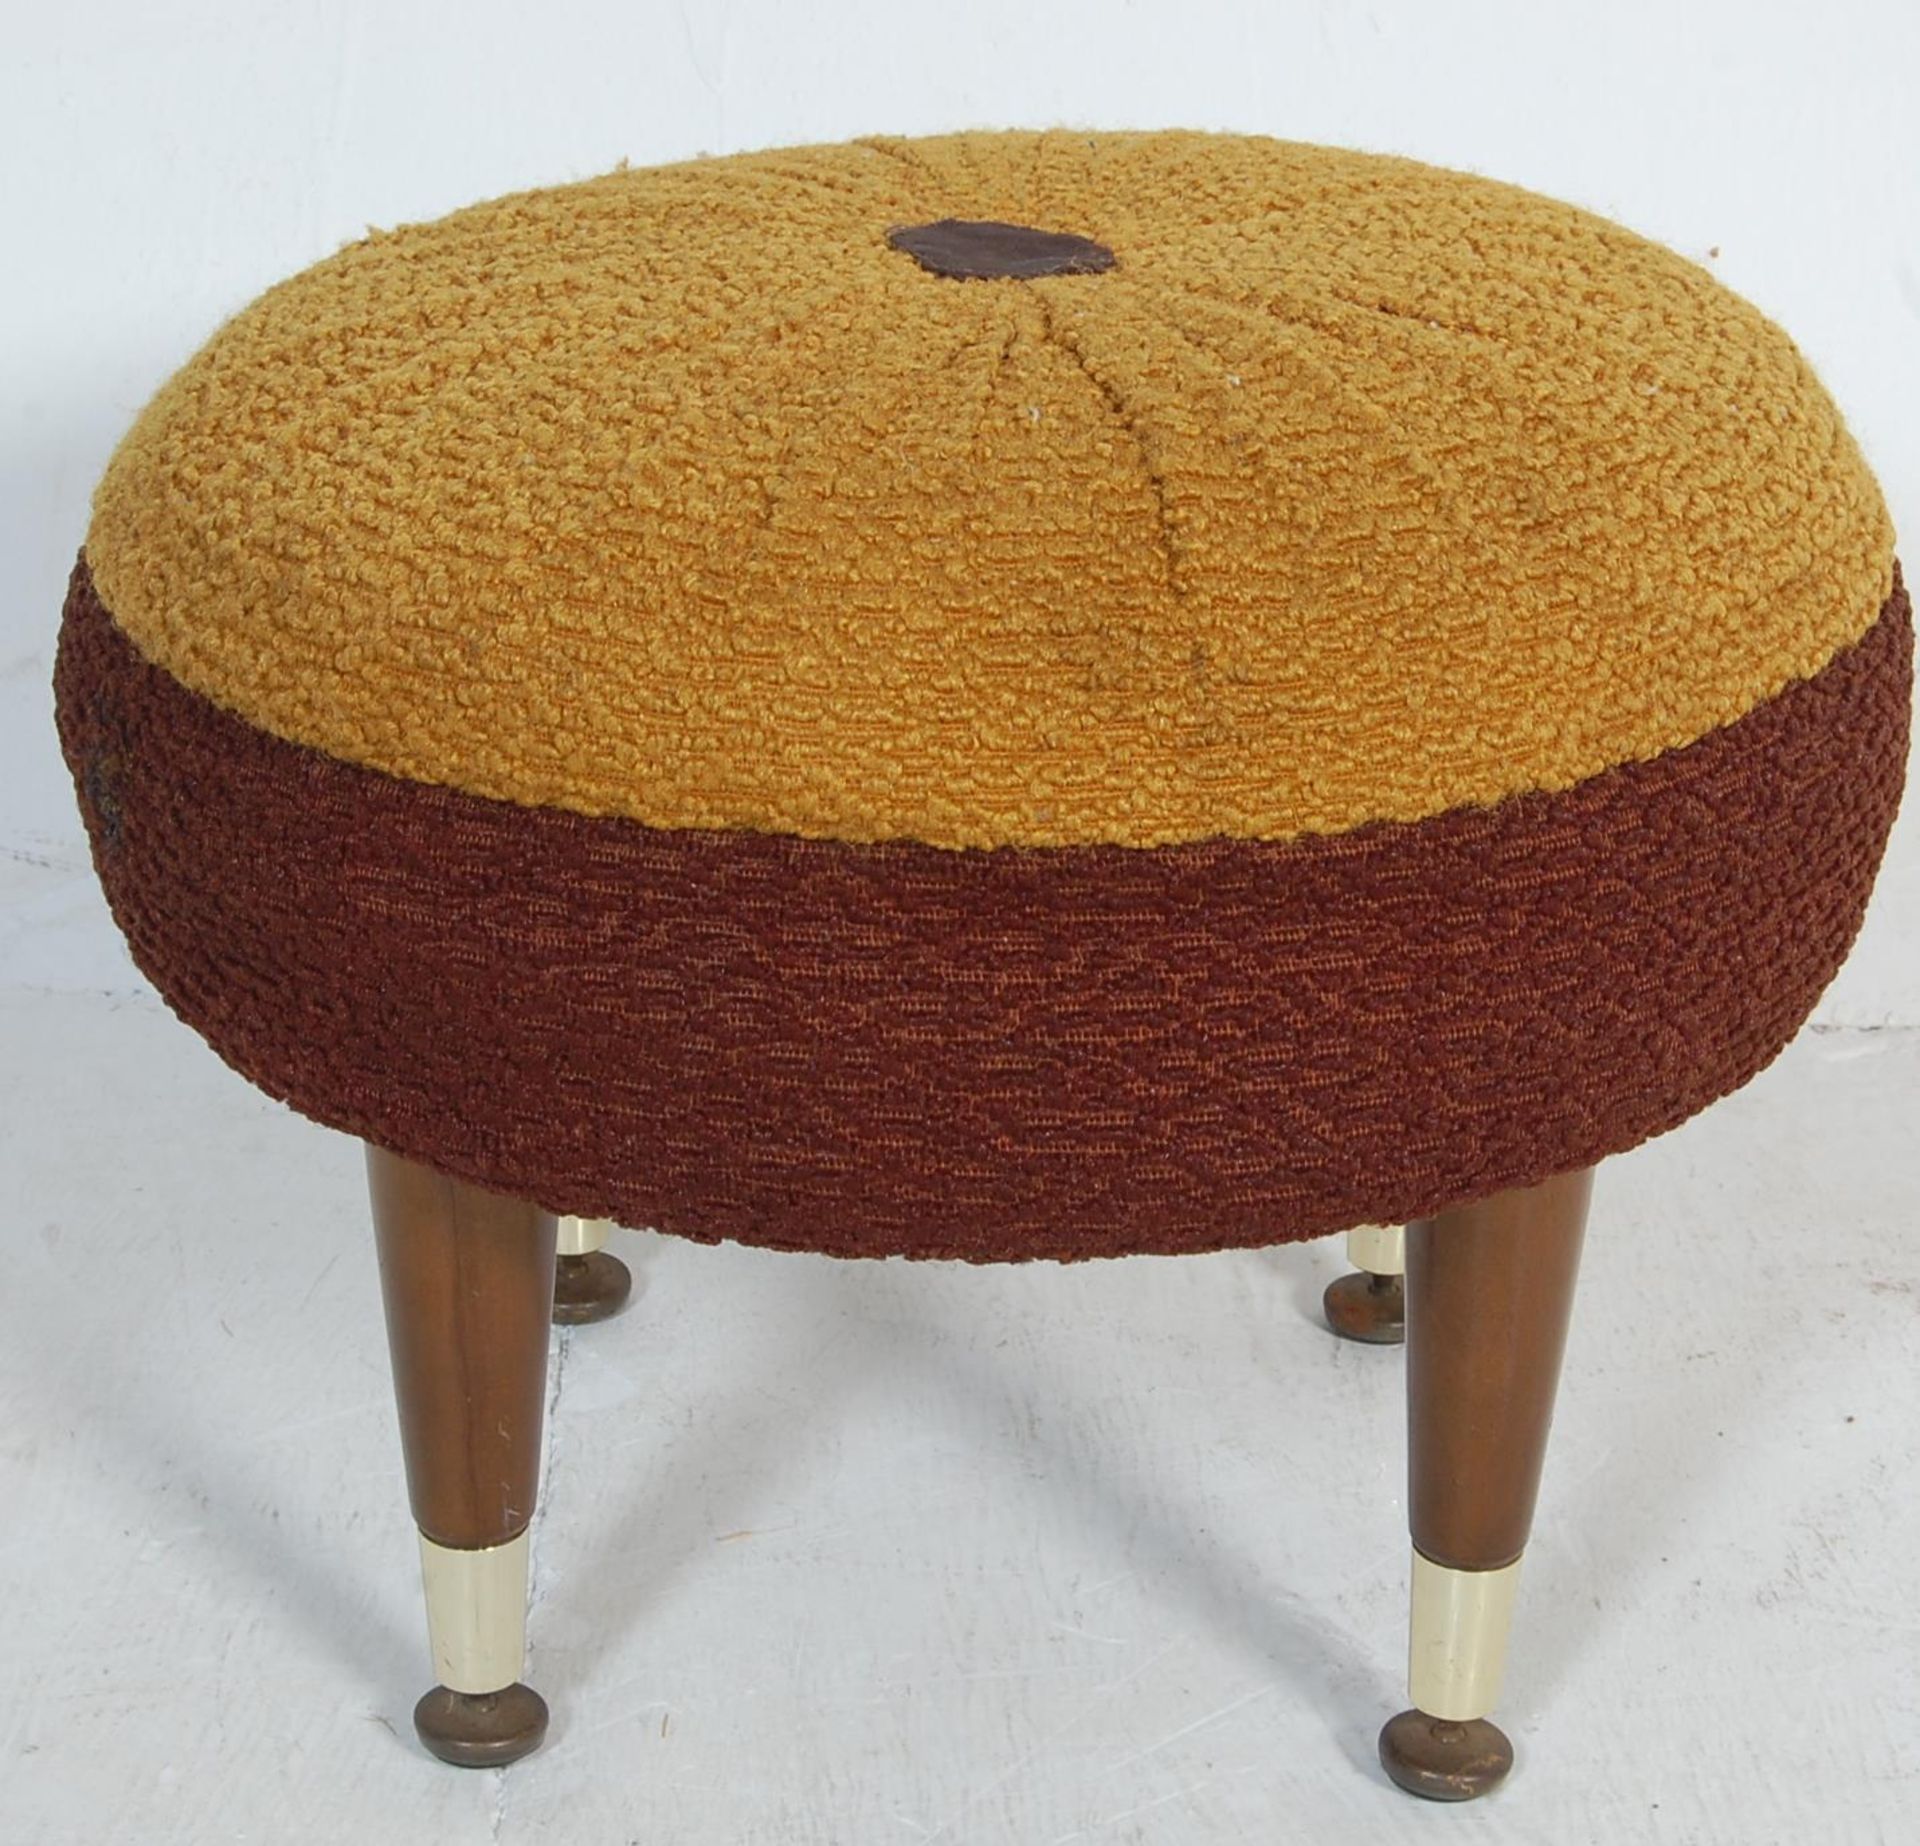 RETRO VINTAGE 1970S TEAK WOOD COFFEE TABLE WITH A CIRCULAR POUFFE/FOOTREST - Image 8 of 8